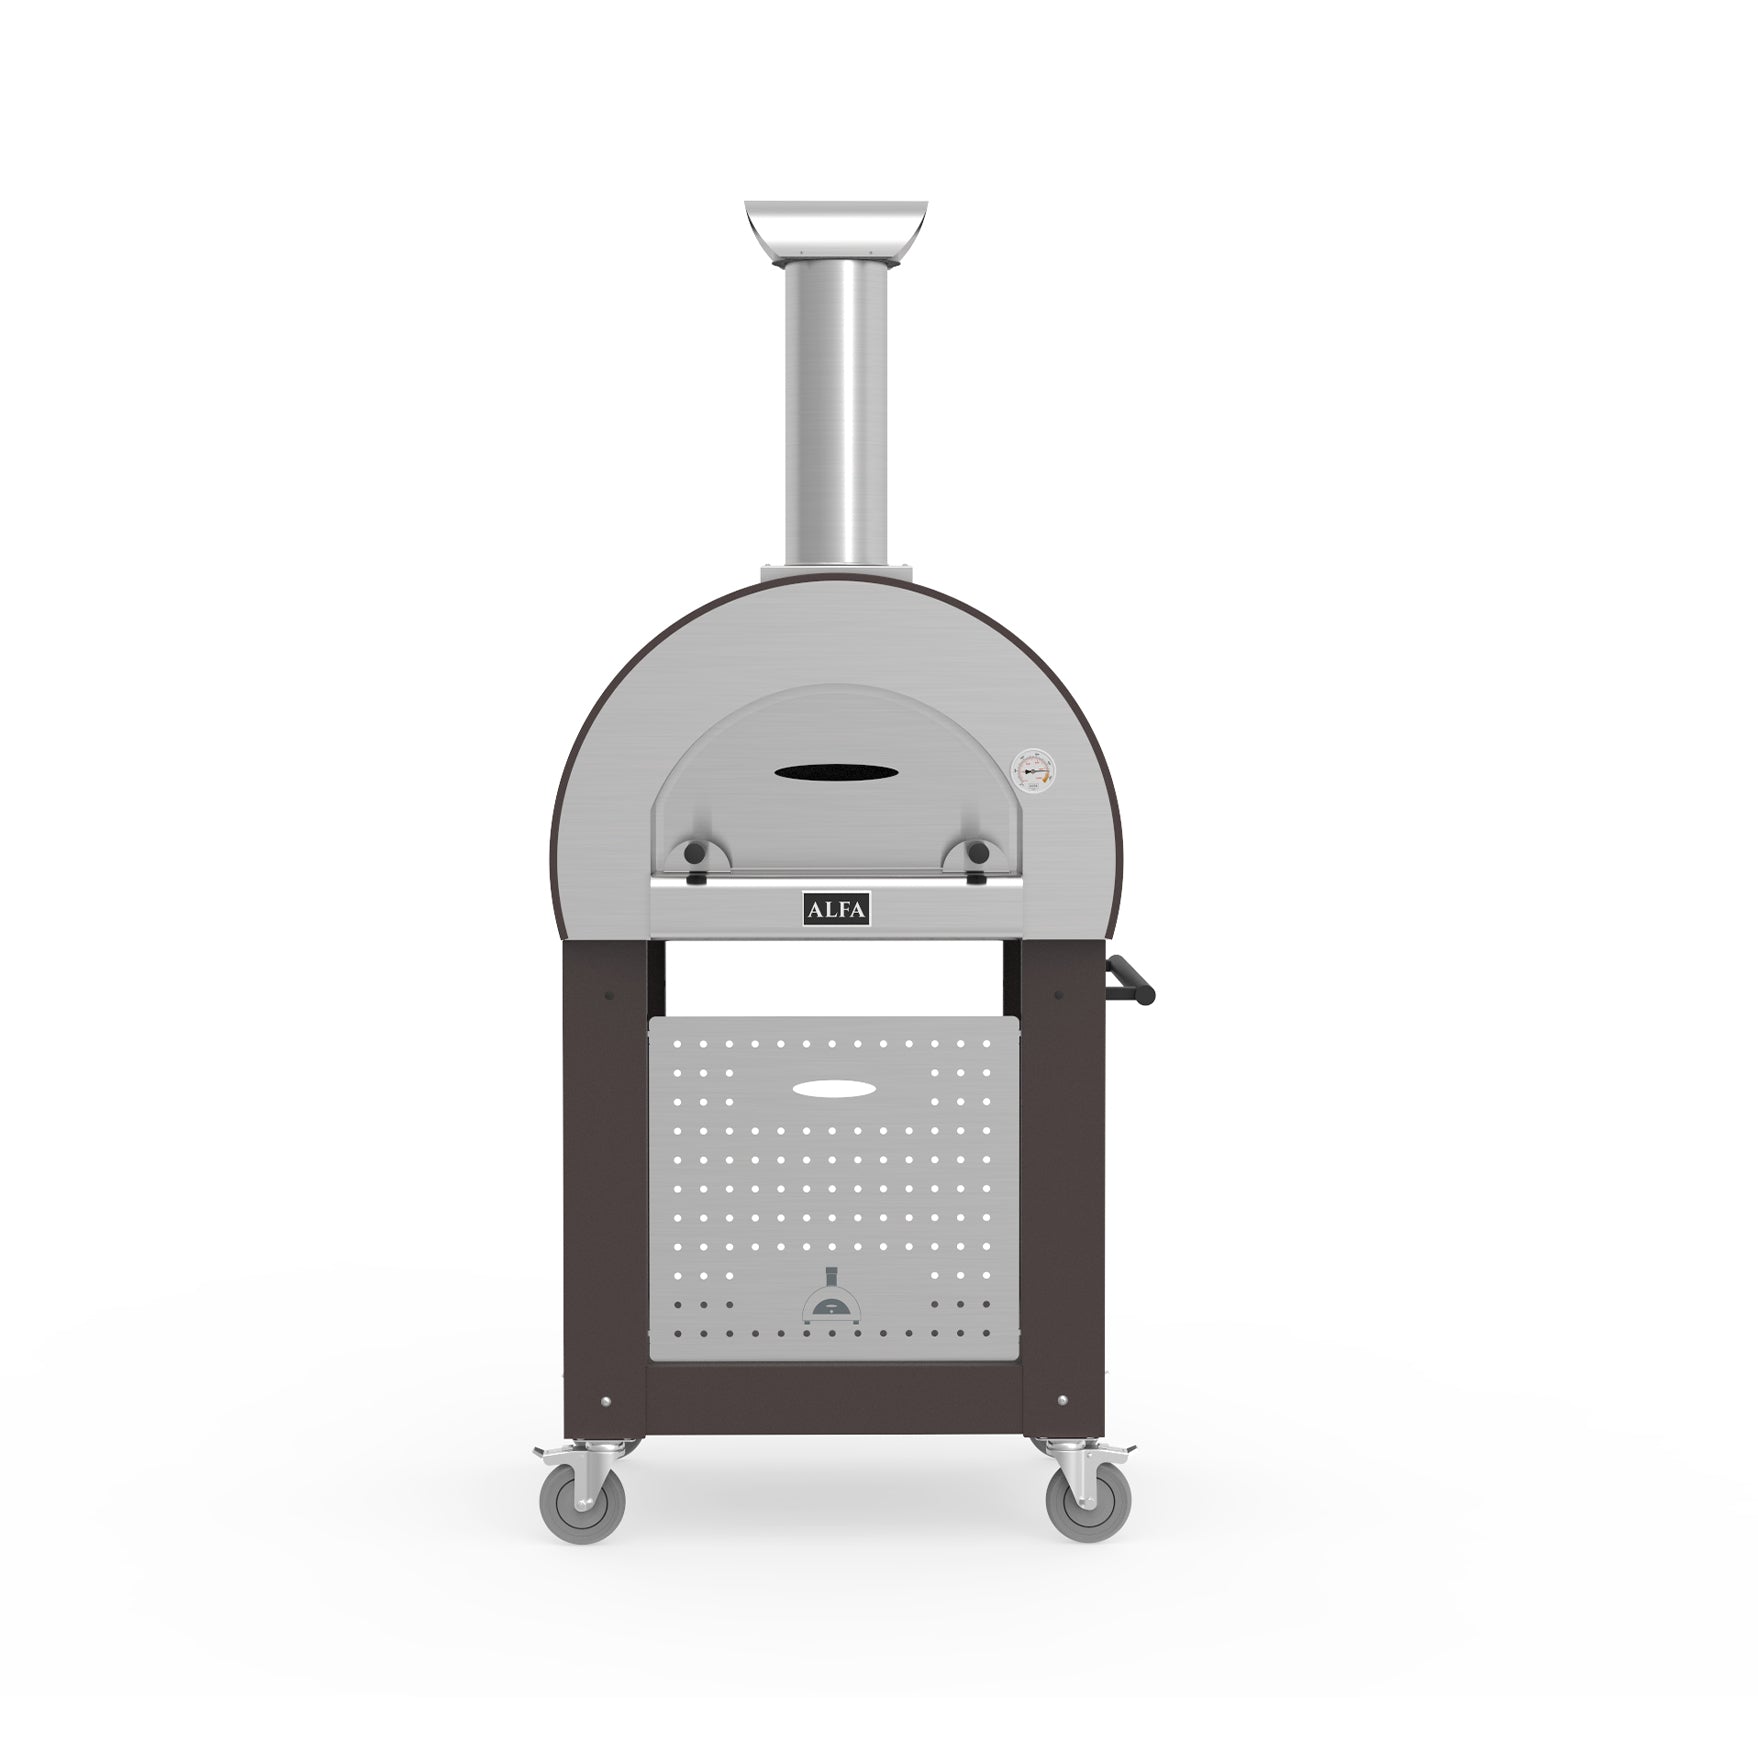 Pizza Oven Stand